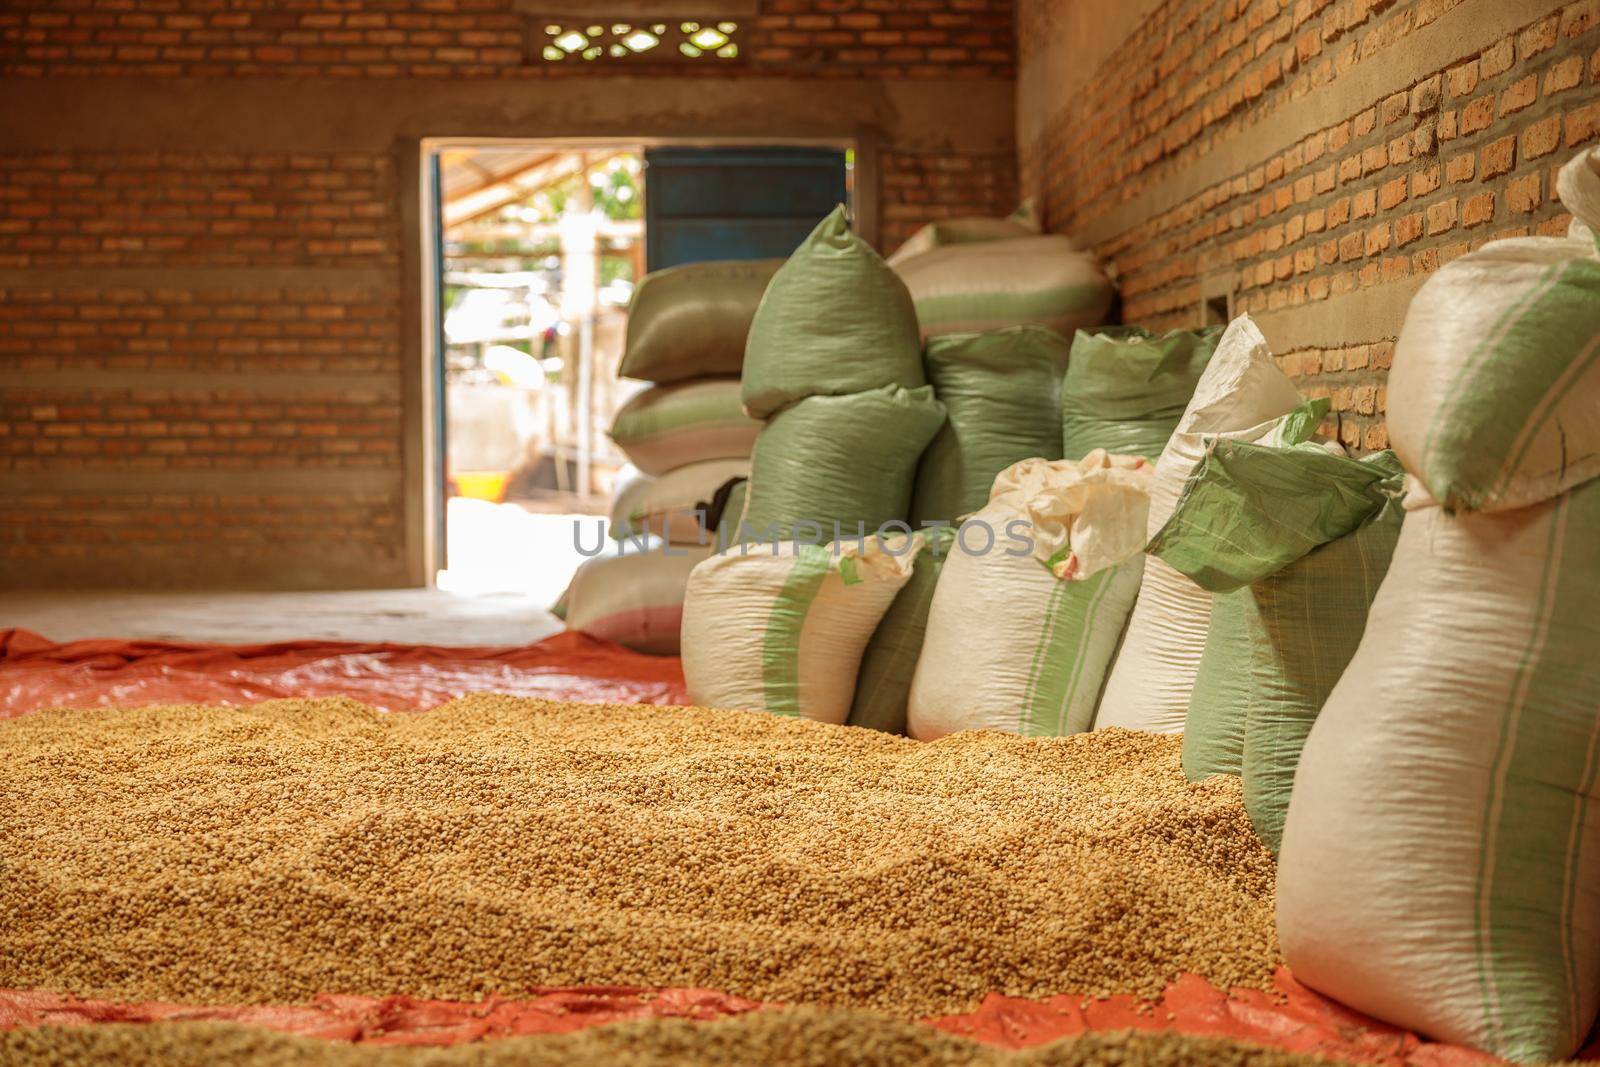 Bags used in the production of coffee at farm in Africa by Yaroslav_astakhov